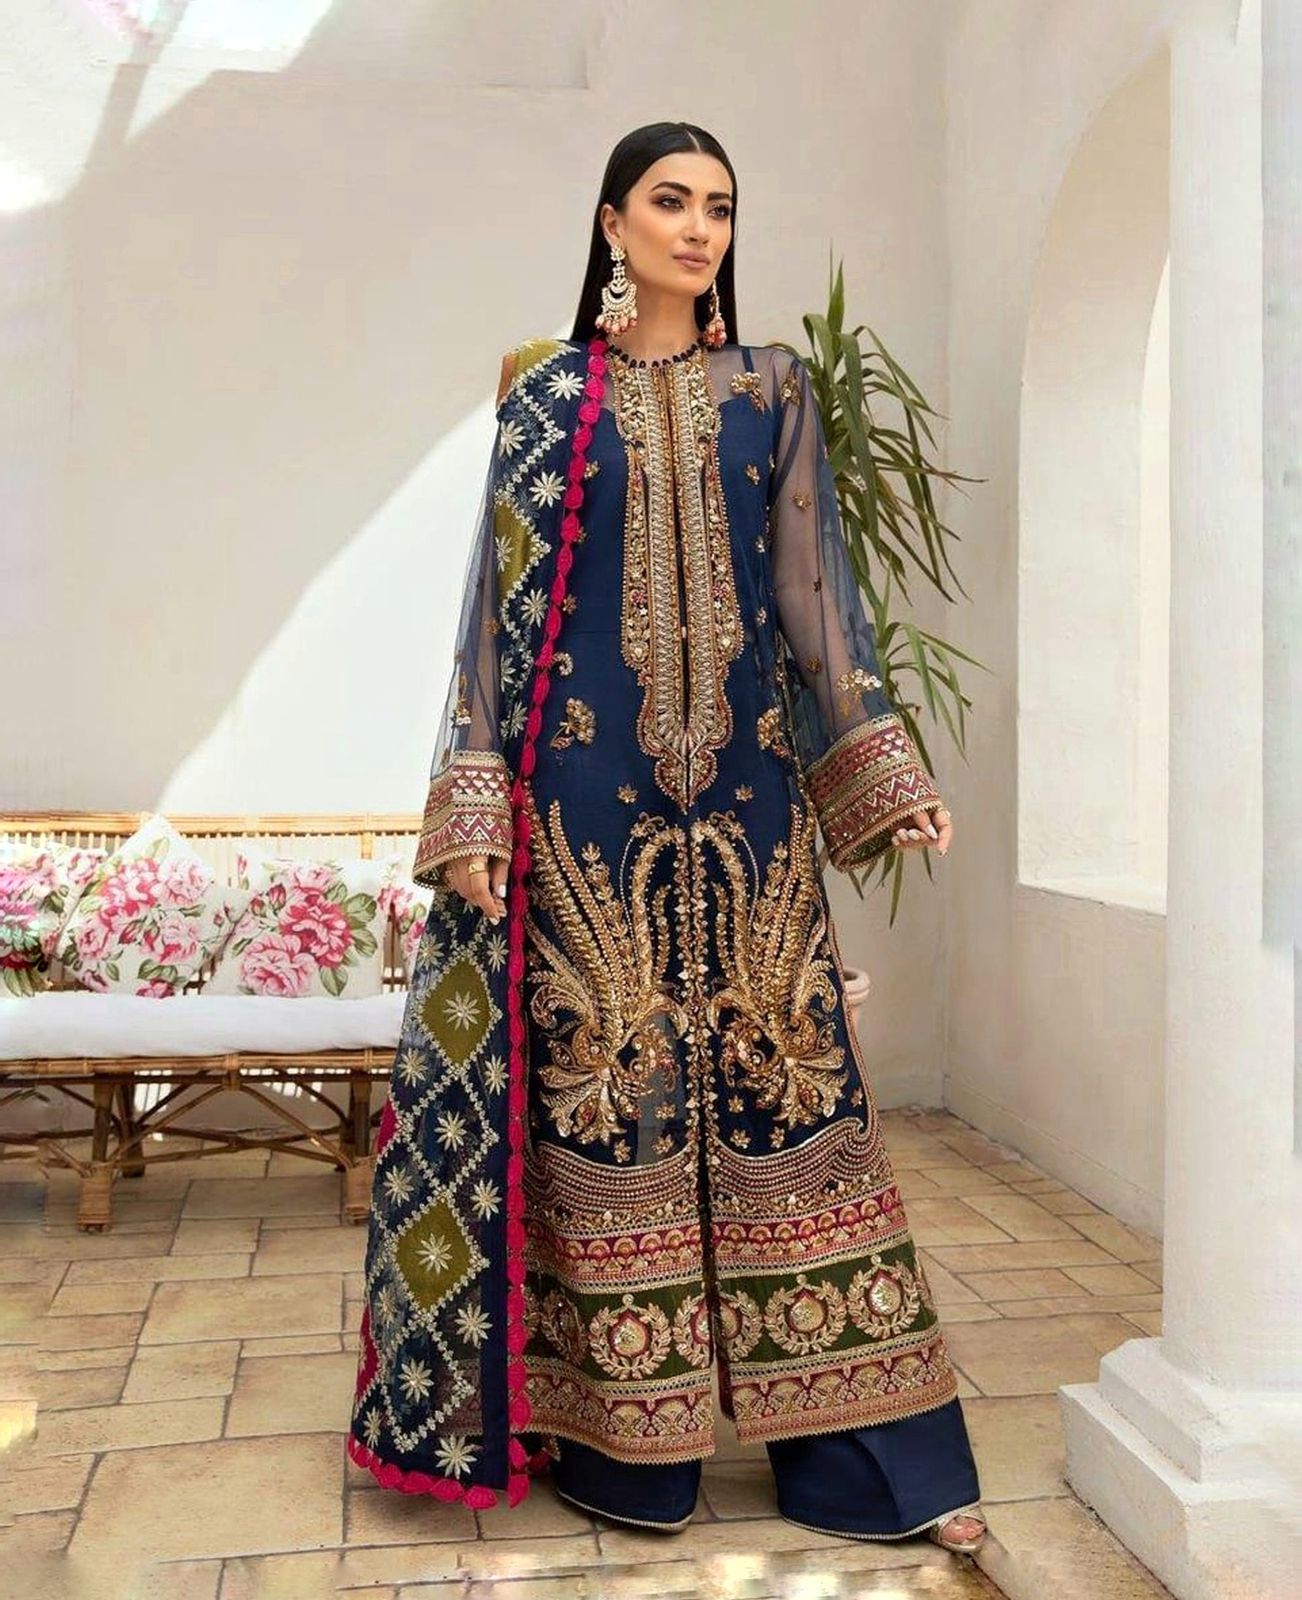 MARYAM HUSSAIN SOFT ORGANZA HEAVILY EMBROIDERY WITH HAND EMBELLISHMENTS WORK 3 PIECE